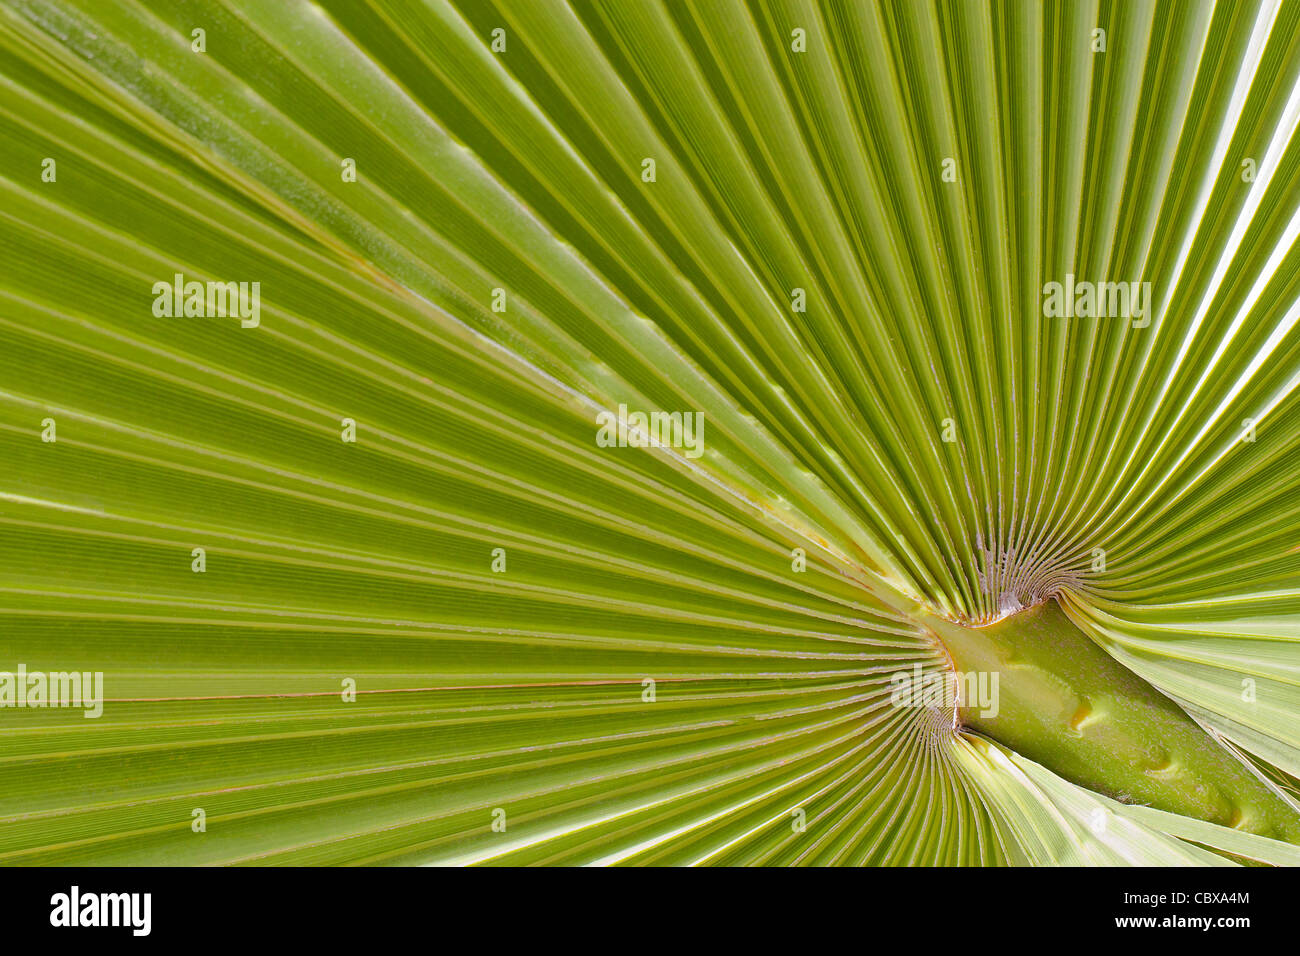 Green background with diagonals created by a close up image of a palm leaf Stock Photo